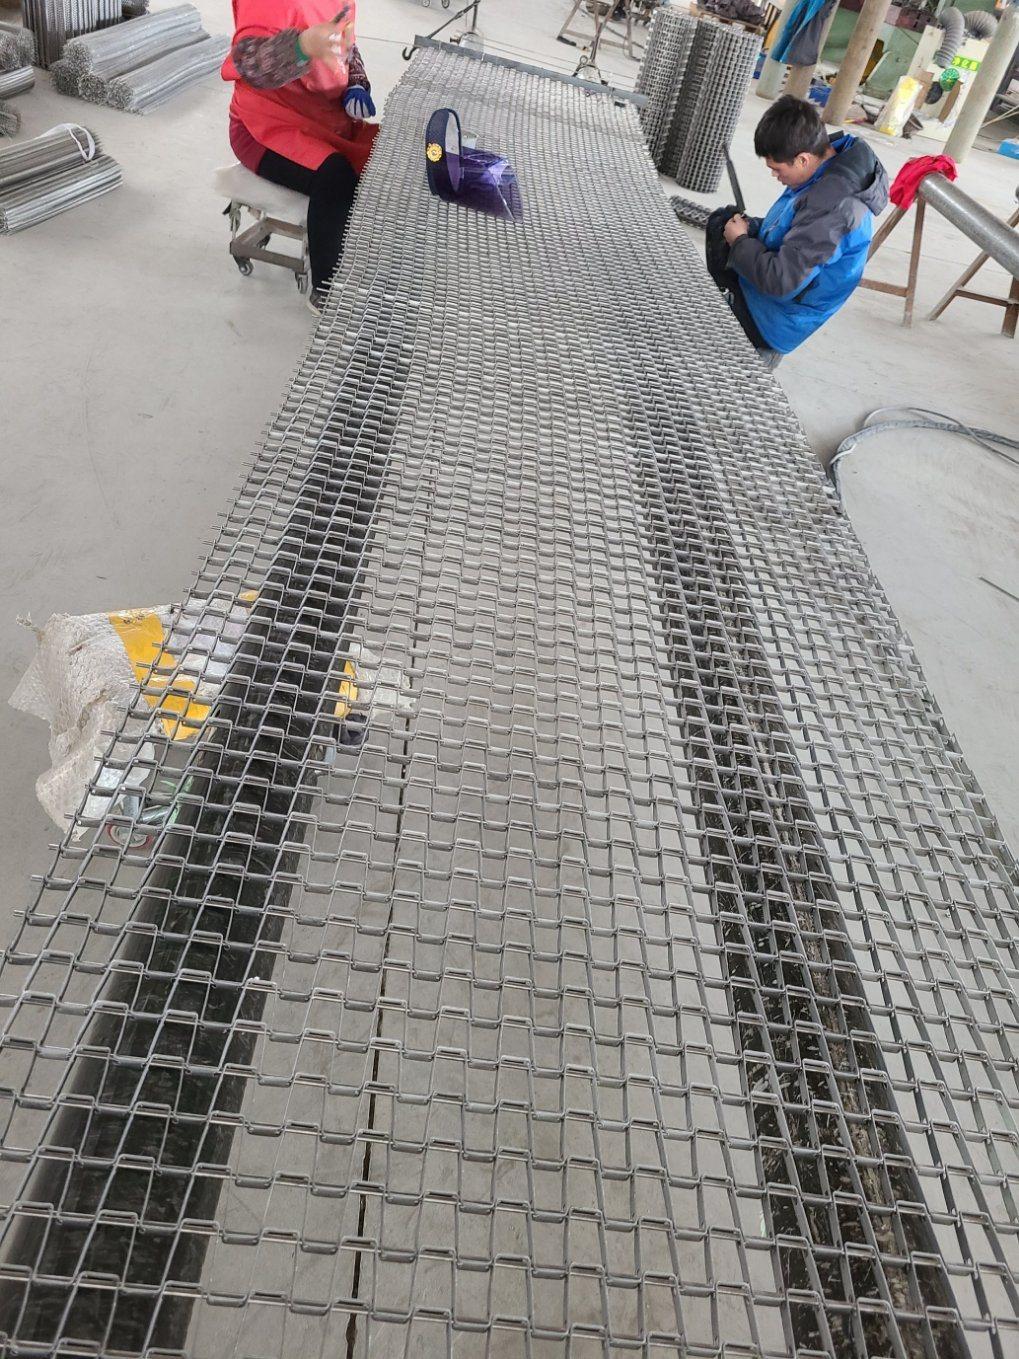 Food Grade Stainless Steel Honeycomb Wire Mesh Conveyor Belt with Good Price